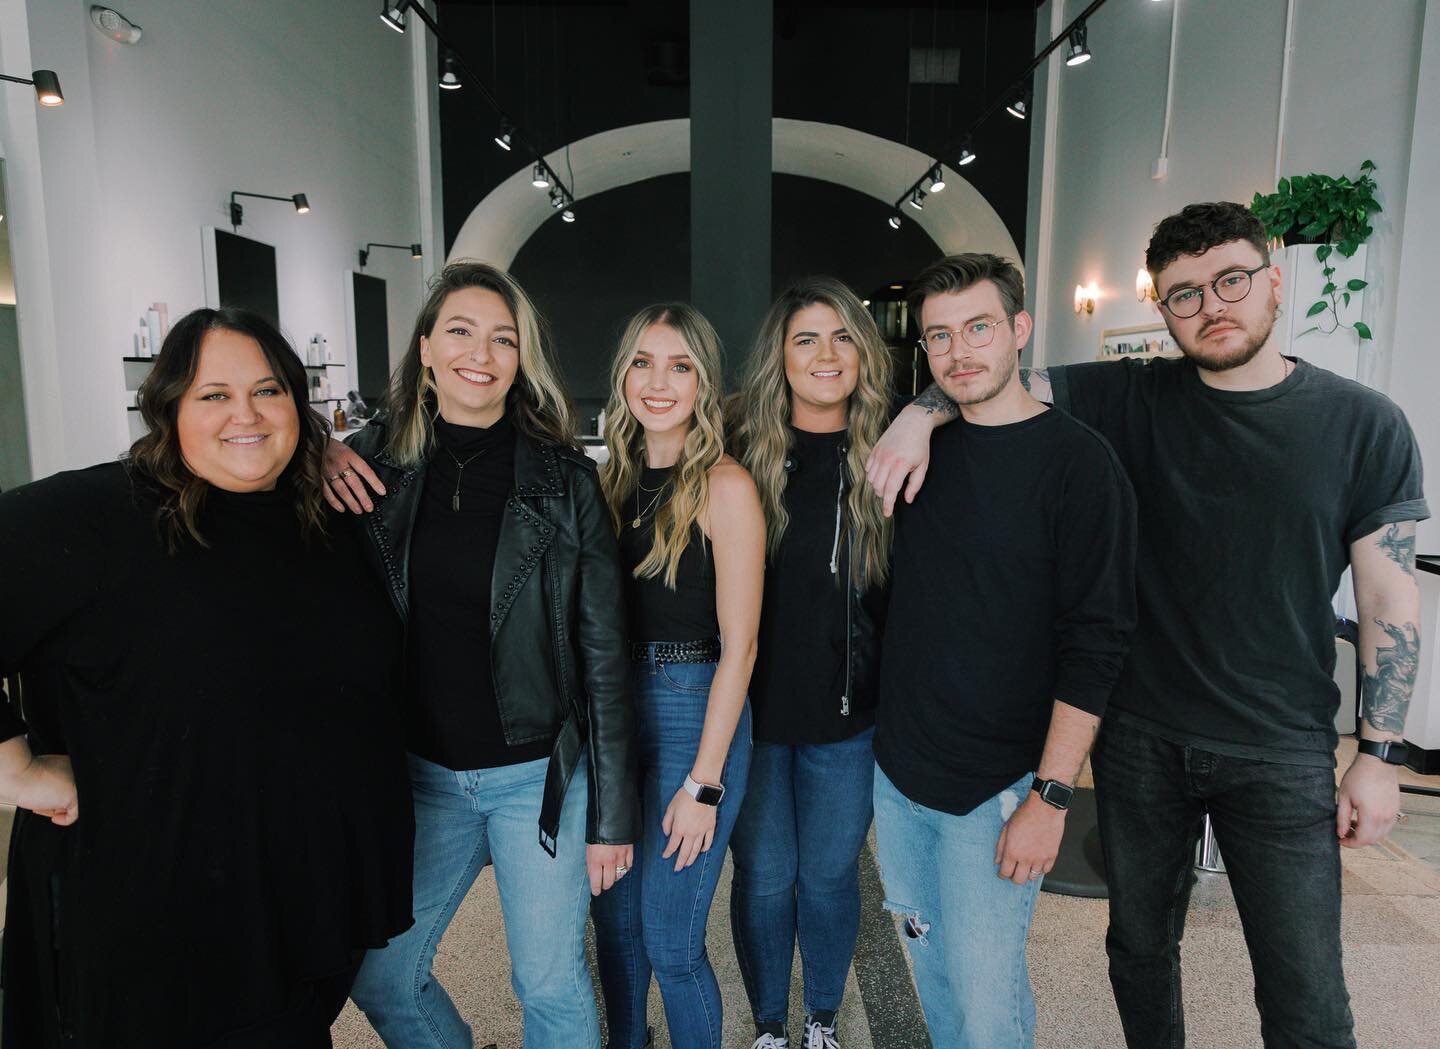 The Co.lab crew is all here! We may be small, but we&rsquo;re mighty! 💪🏼👊🏼
..
📷 Photo X @david_actually 
..
..
@kate_mccliment 
@ross_schultz 
@cortschultz 
@lanegrimes 
@sara_albertson 
@leighleighhair